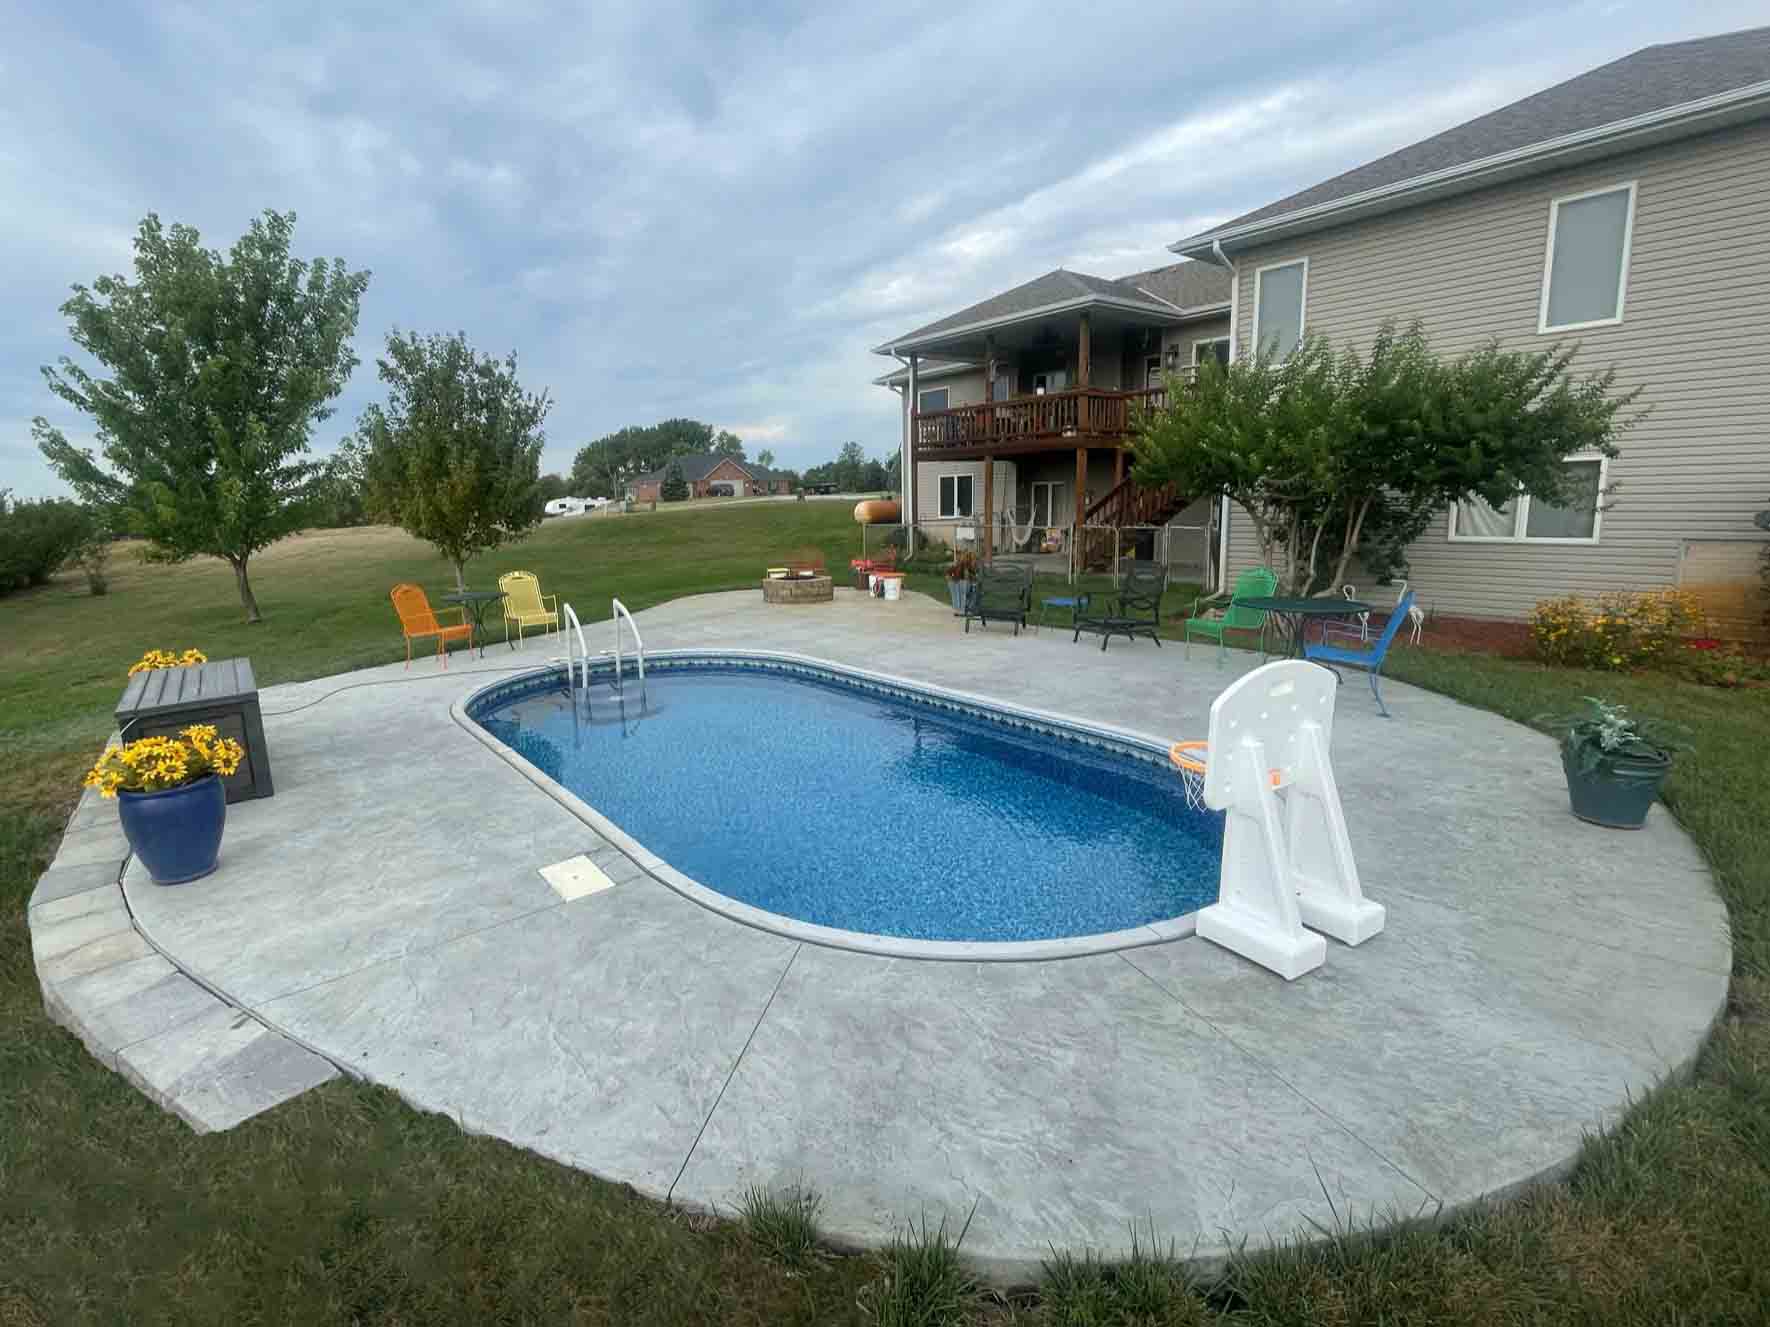 in-ground pool with surrounding concrete patio